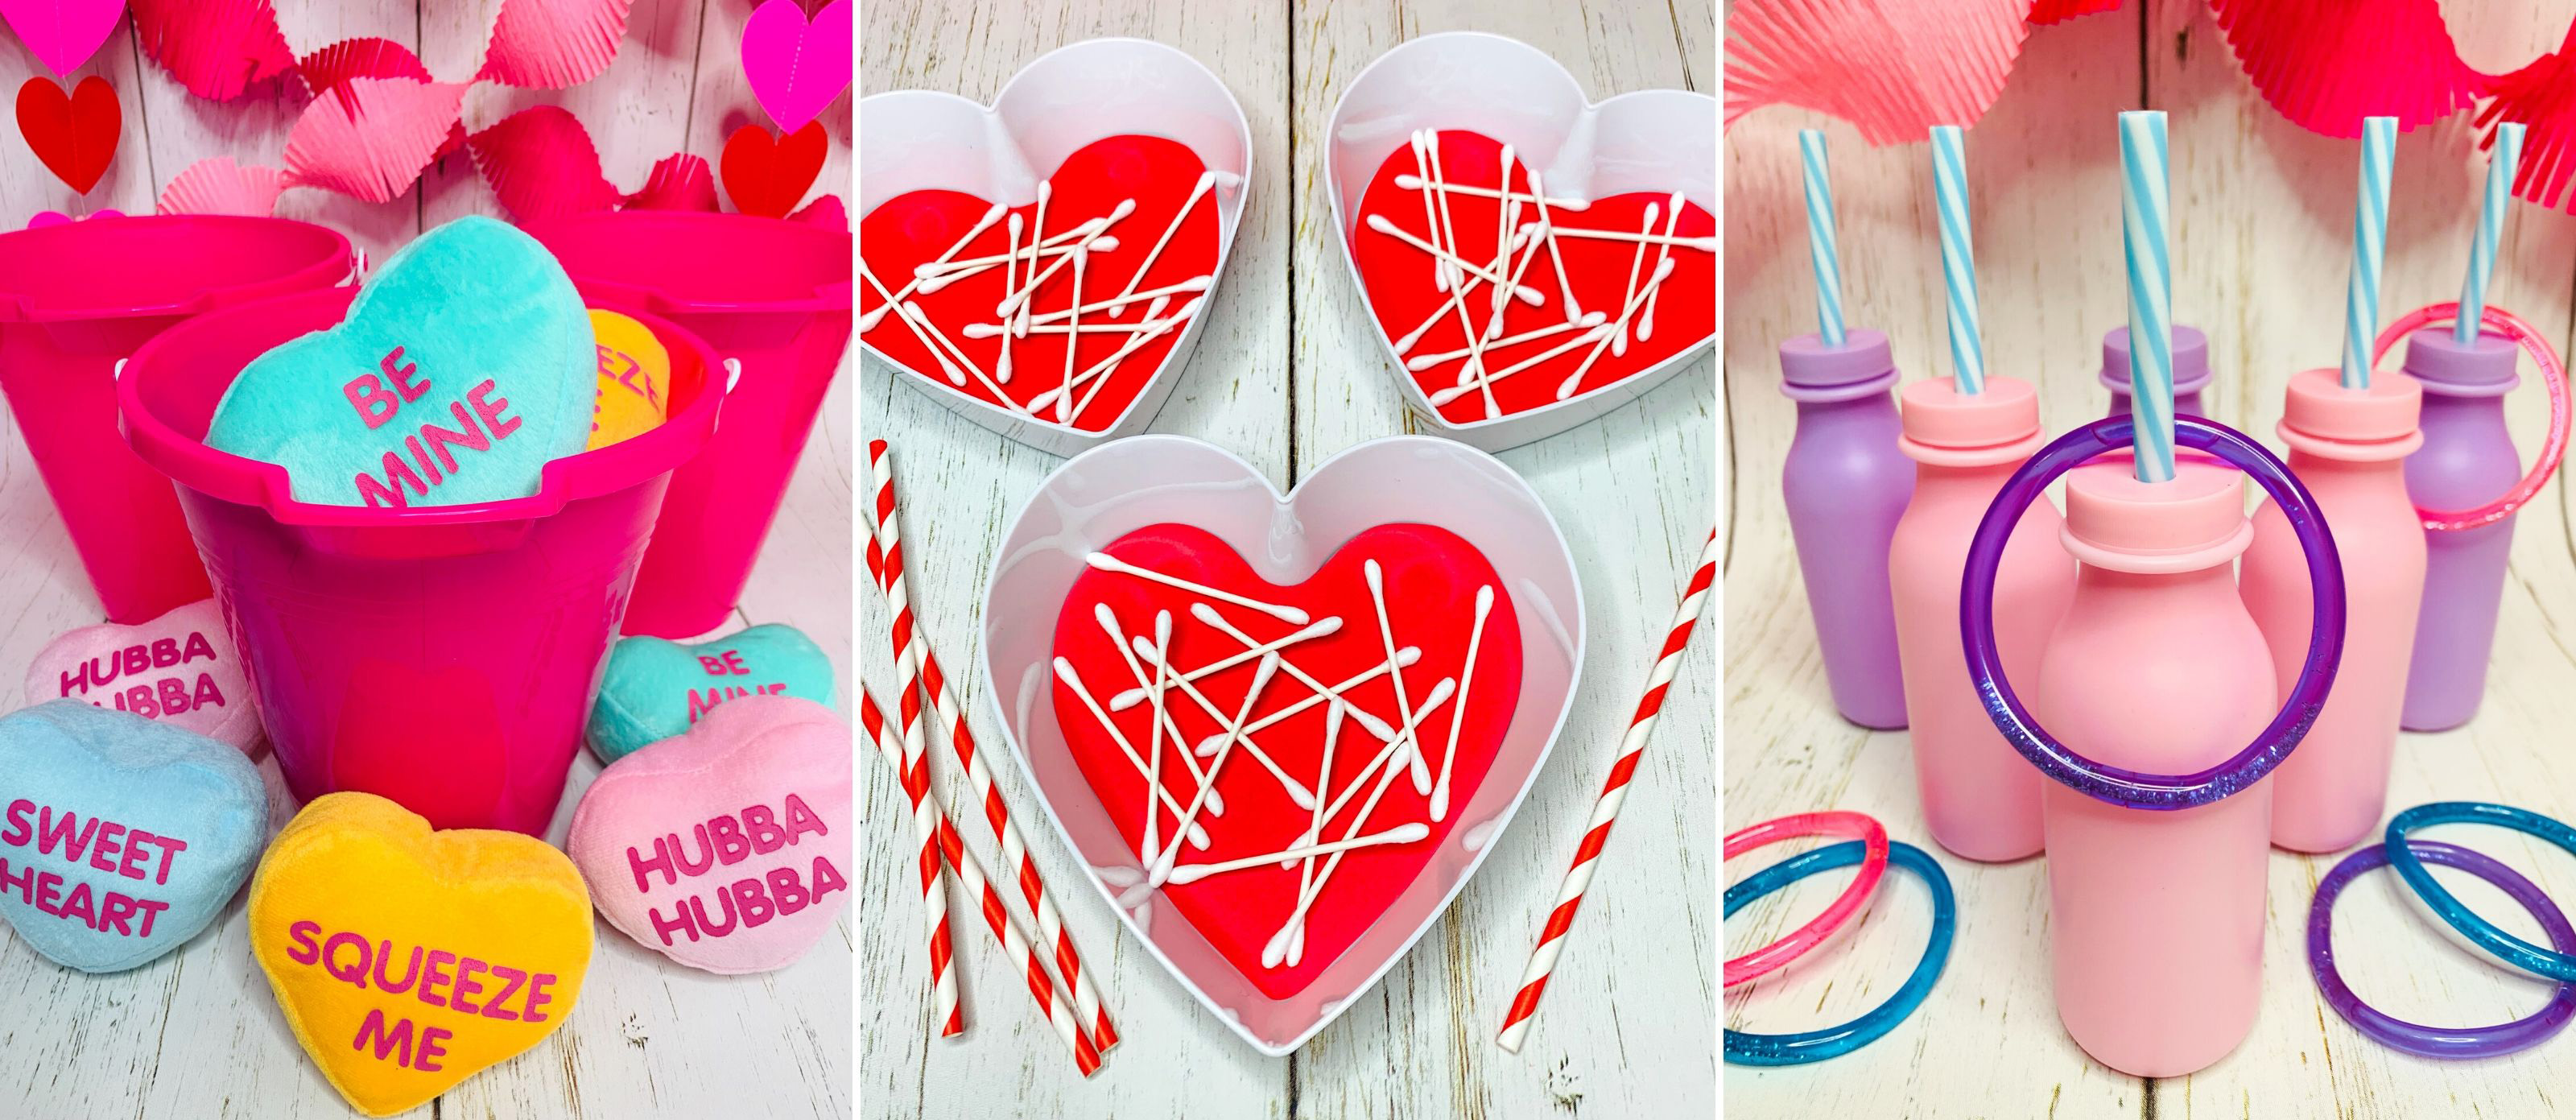 Classroom Valentine Favors Valentine Pencils Toppers 